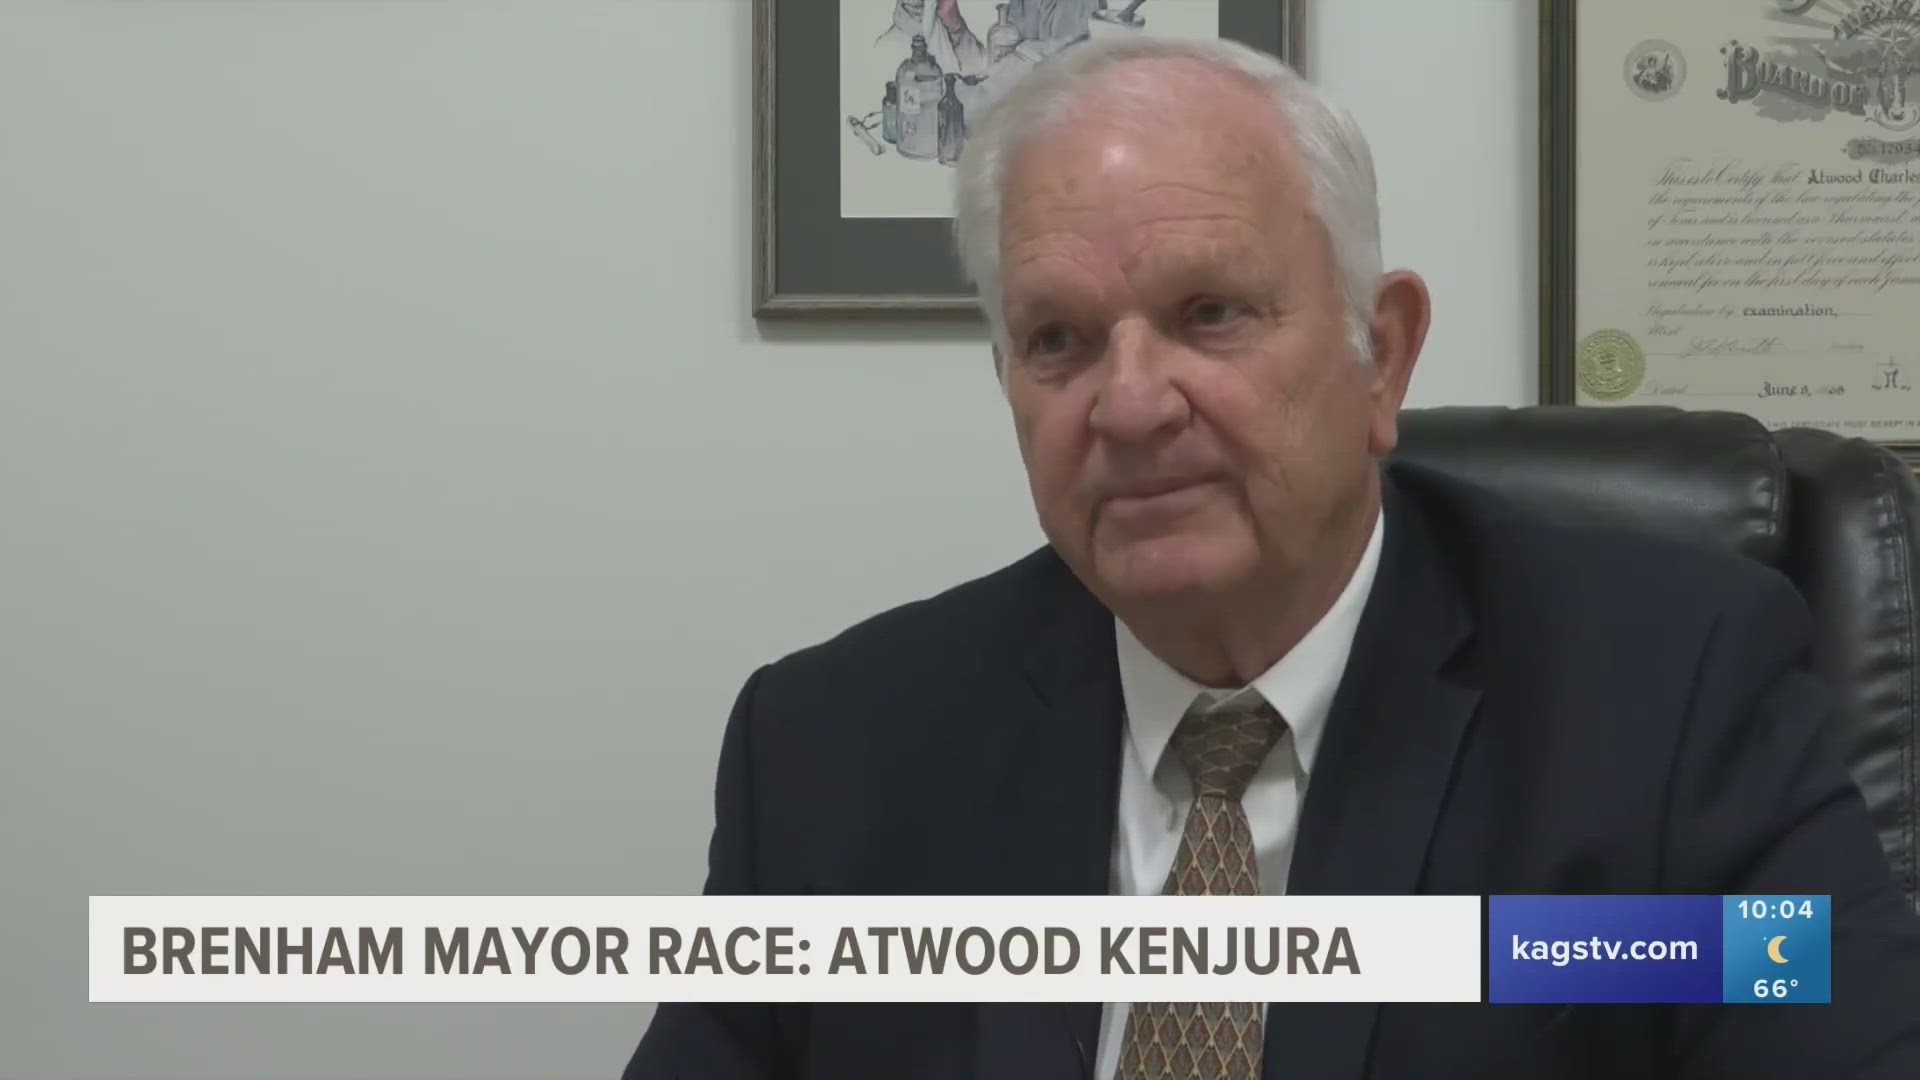 Atwood Kenjura, who has served on the Brenham City Council for two years, is a fifth generation resident of the town and wants to manage the ongoing growth.